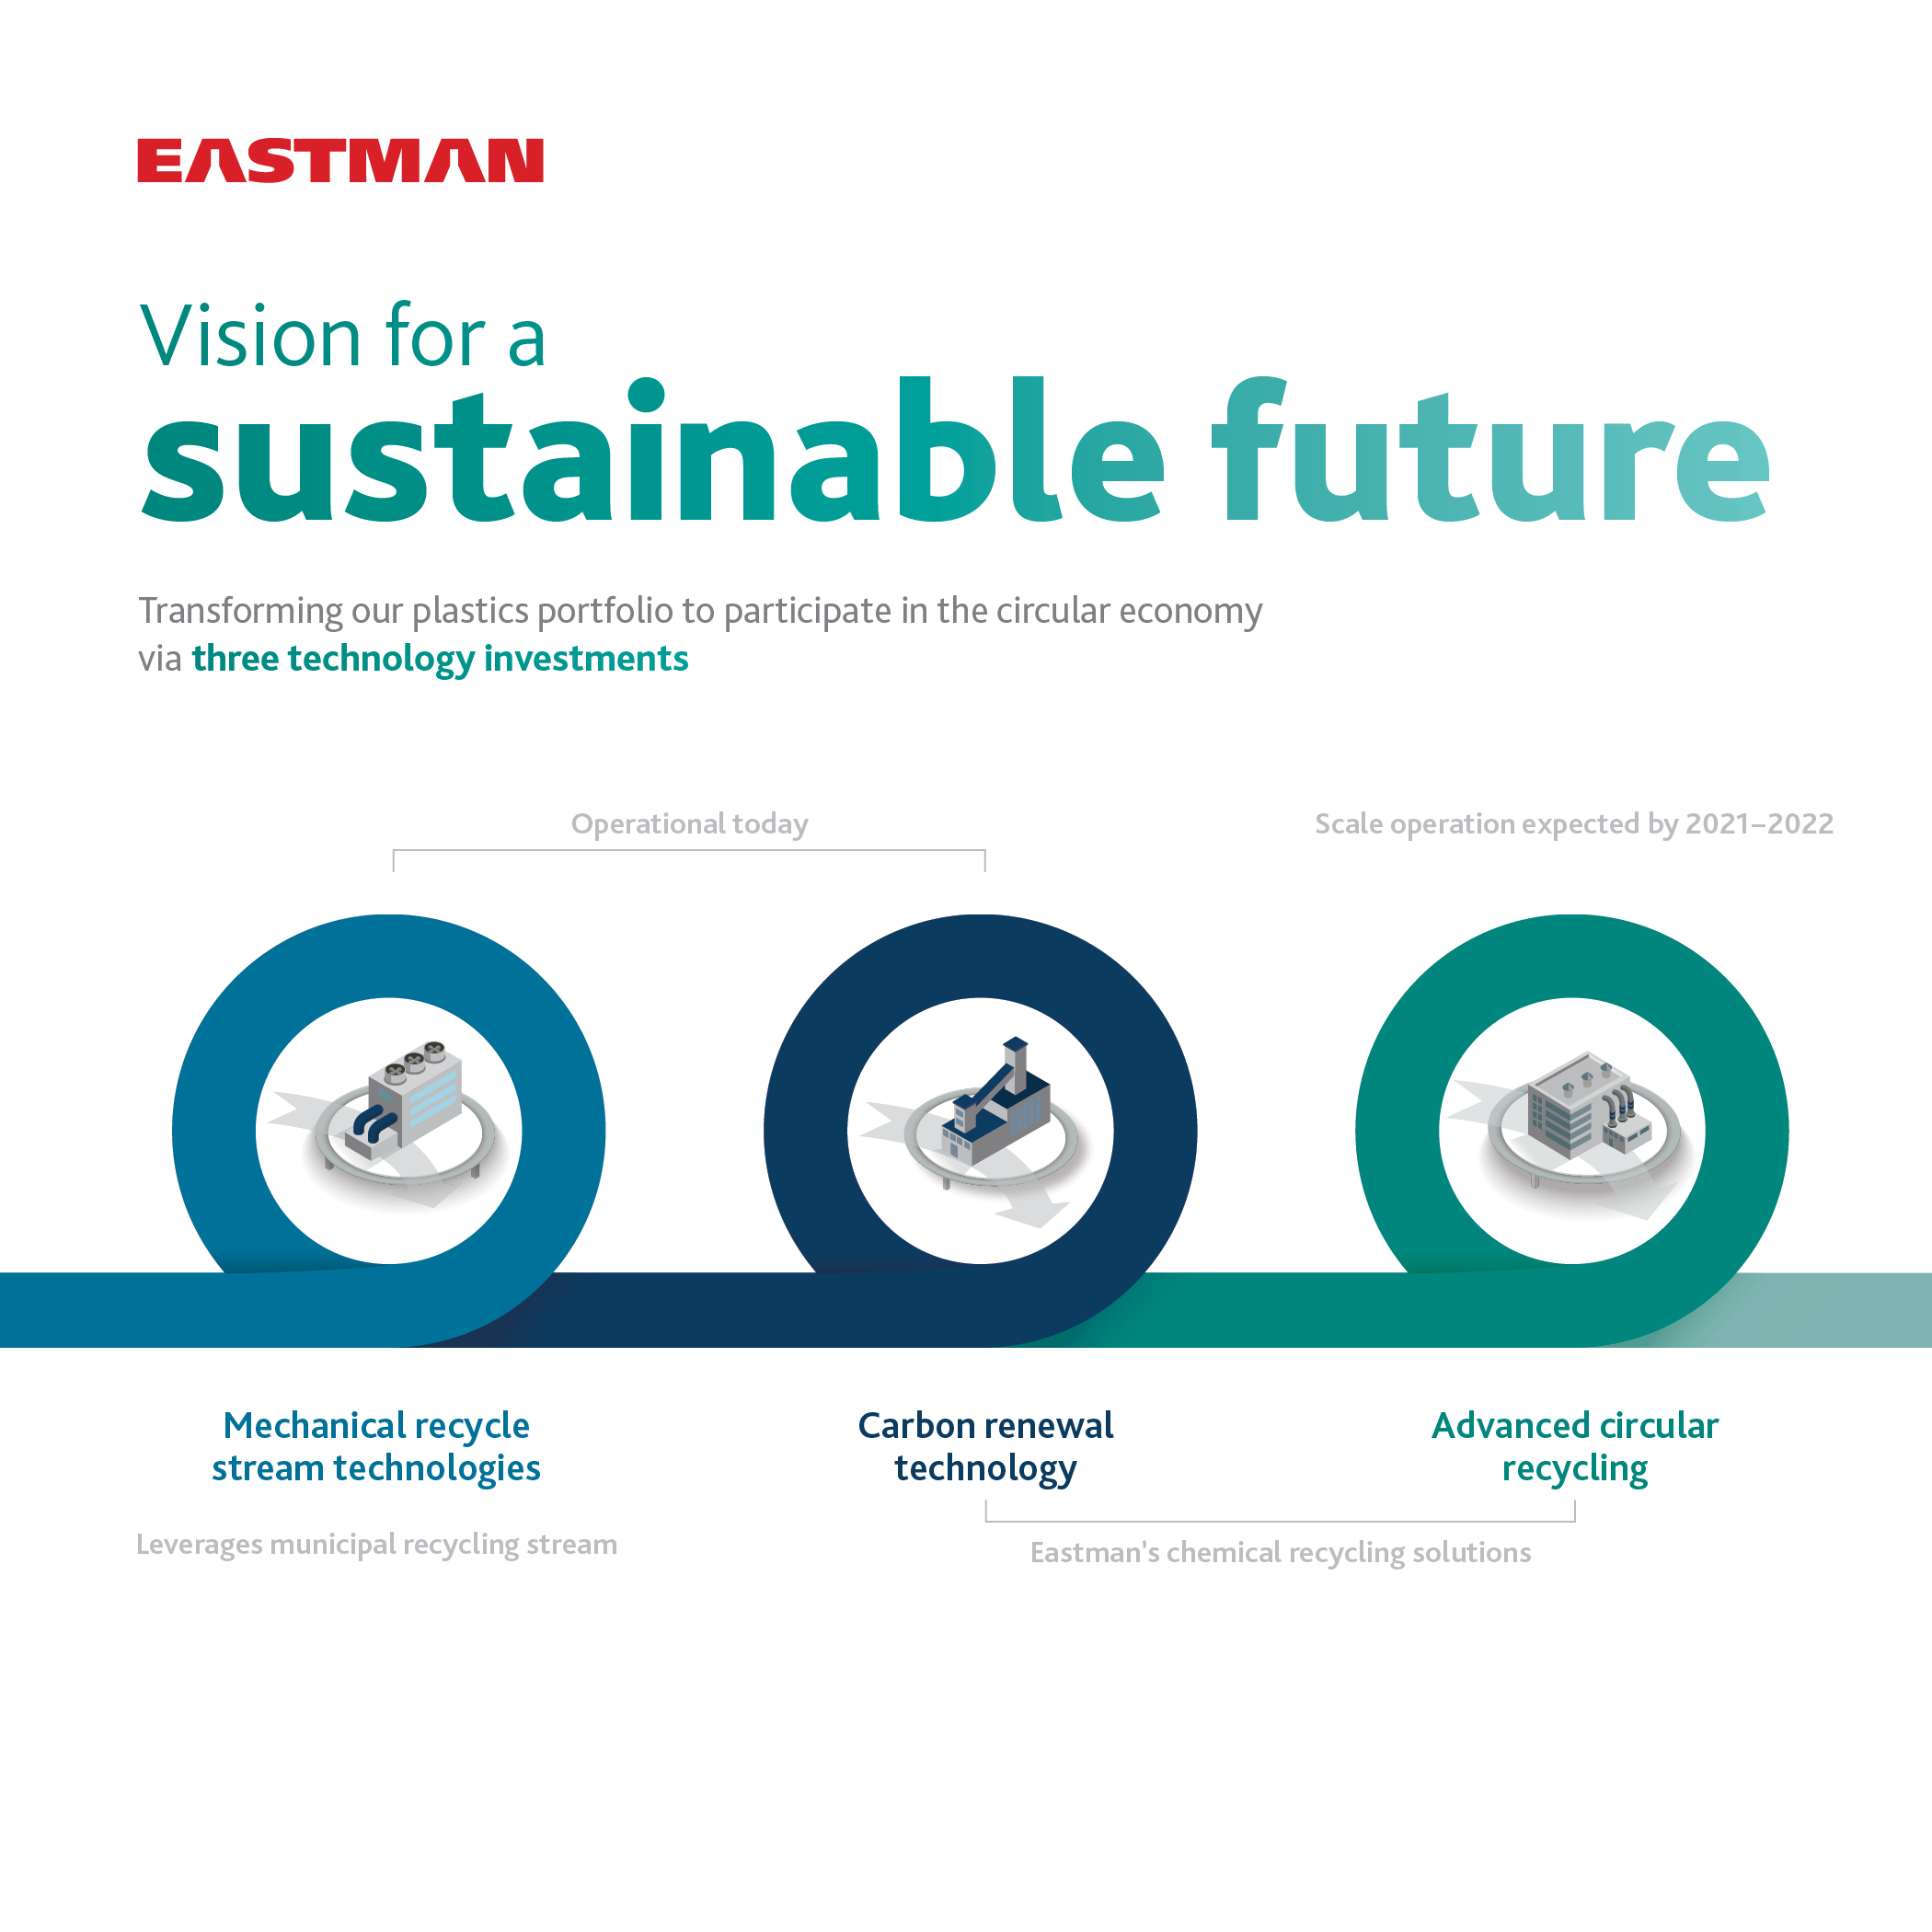 Eastman is transforming its cosmetic packaging portfolio to participate in the circular economy through three technology investments.